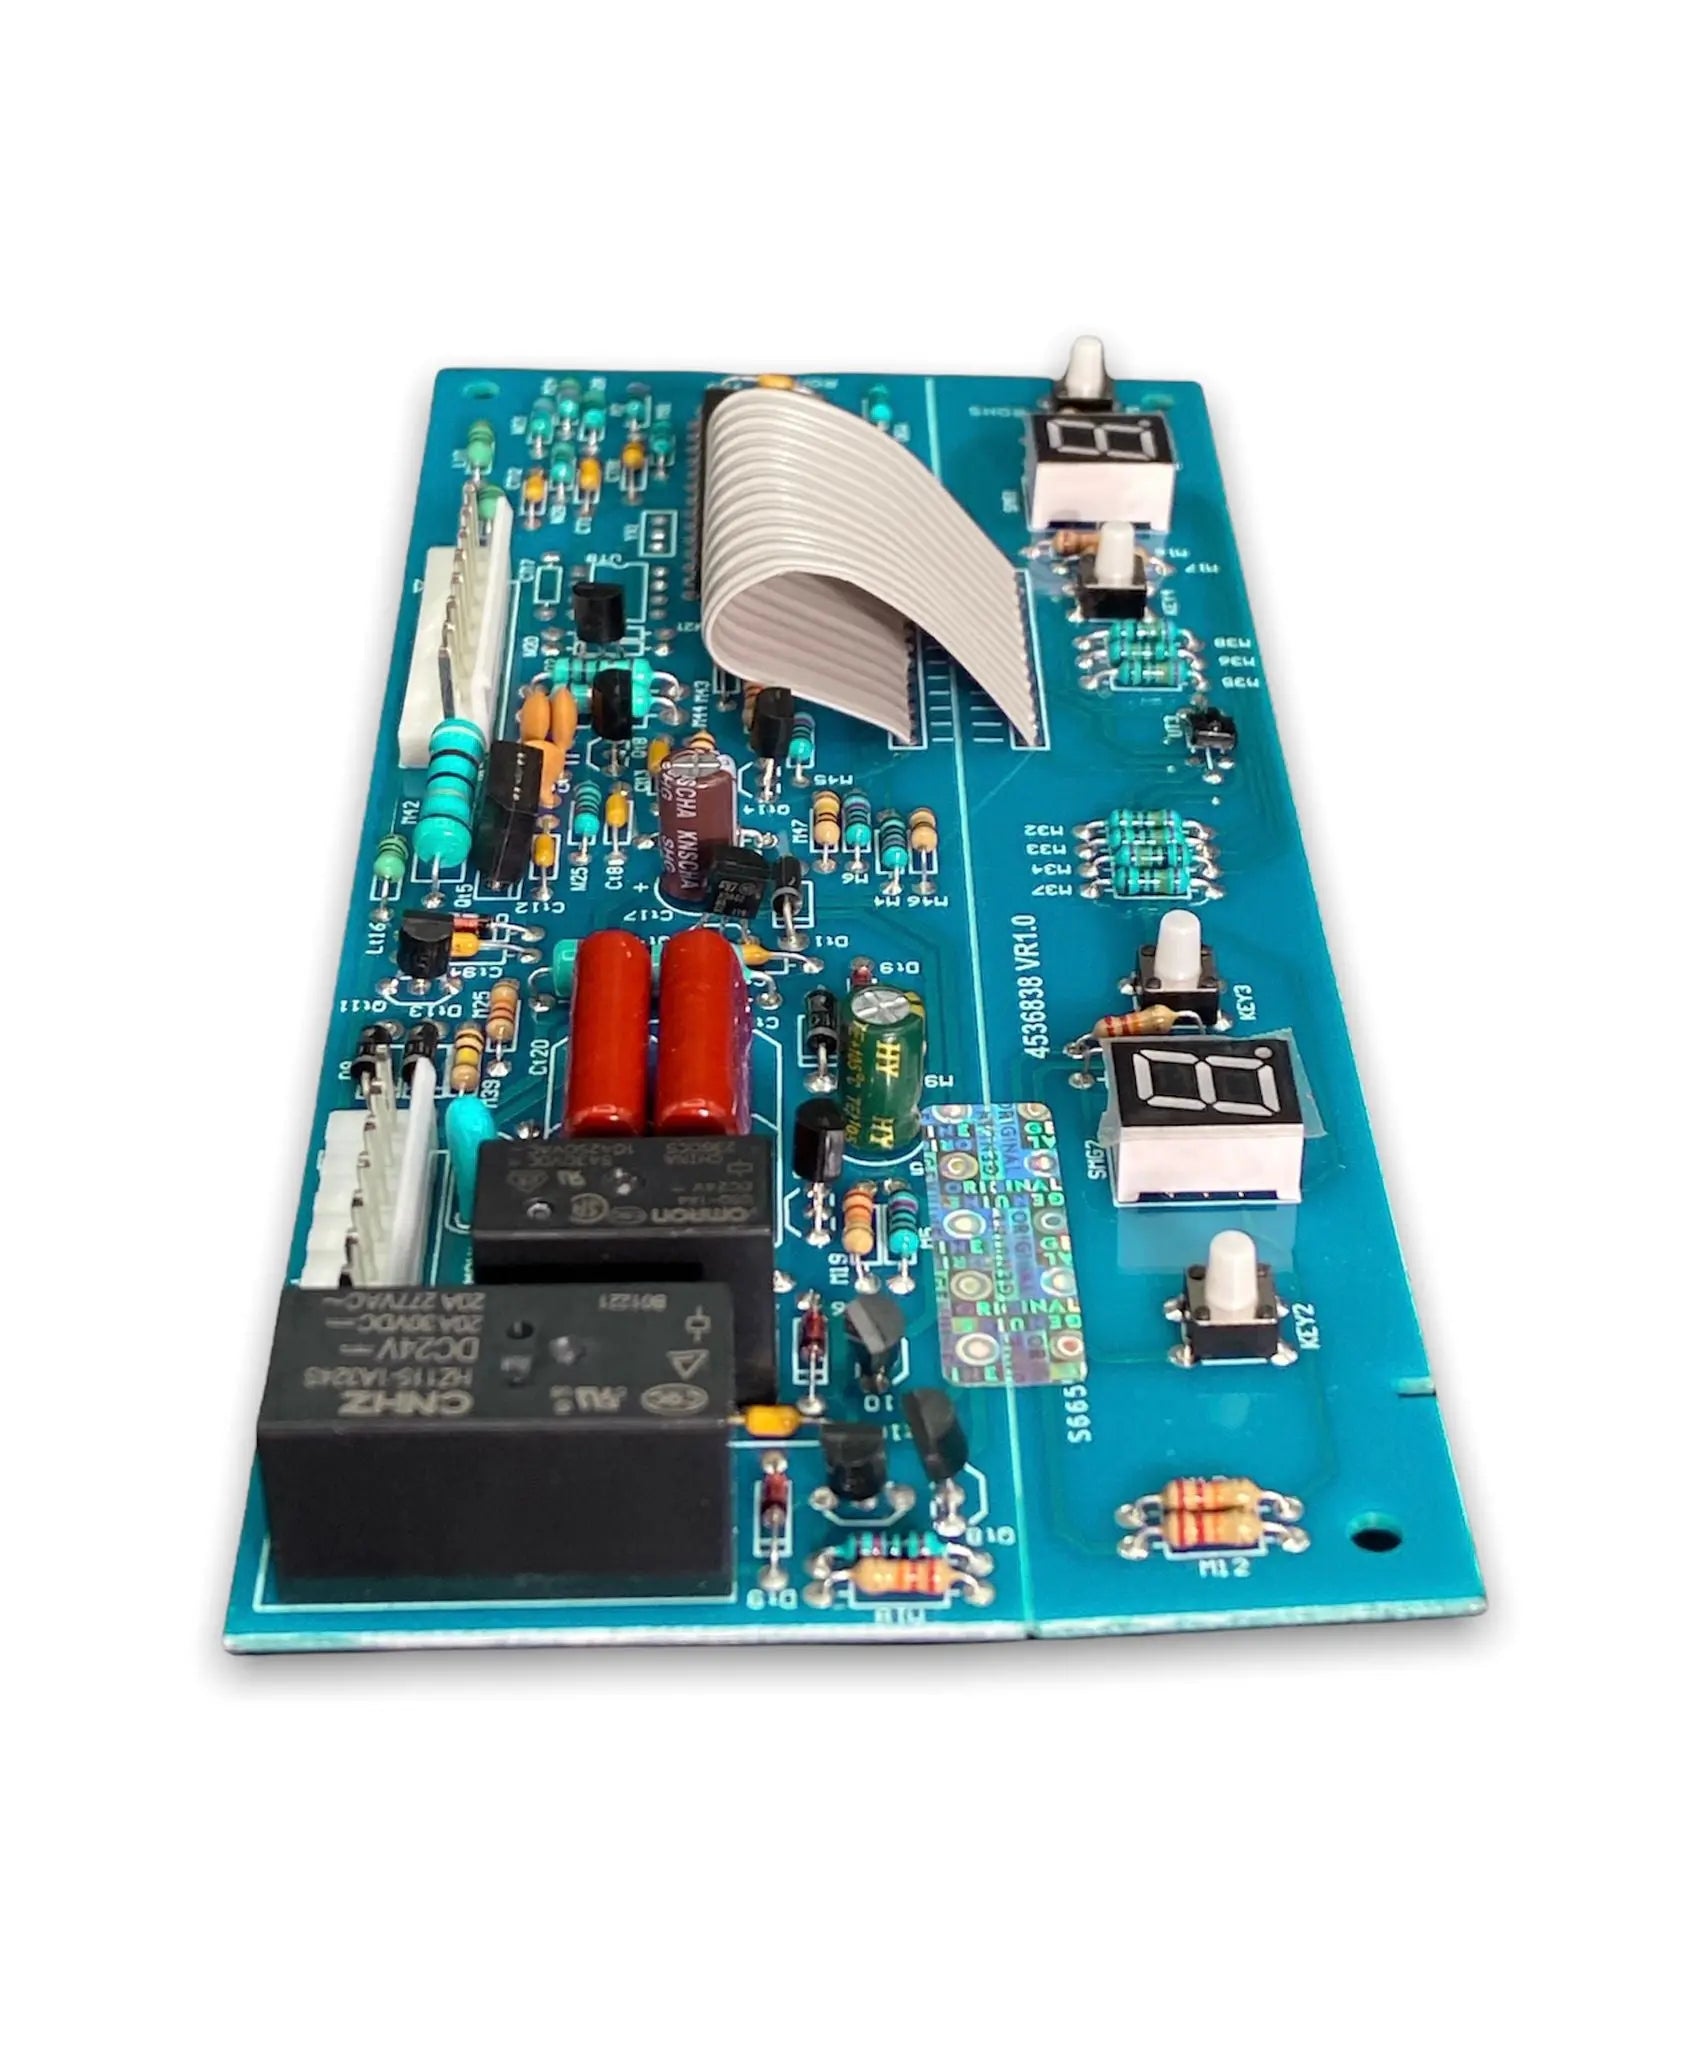 Whirlpool Refrigerator Electronic Control Board - WPW10503278 or W10503278, REPLACES: 8208187 PD00004512 12002339 12002449 12002508 12002509 12002567 12002706 12784415 12784415V 12868502 12868510 12868513 67003867 67004453 67004496 67004907 INVERTEC